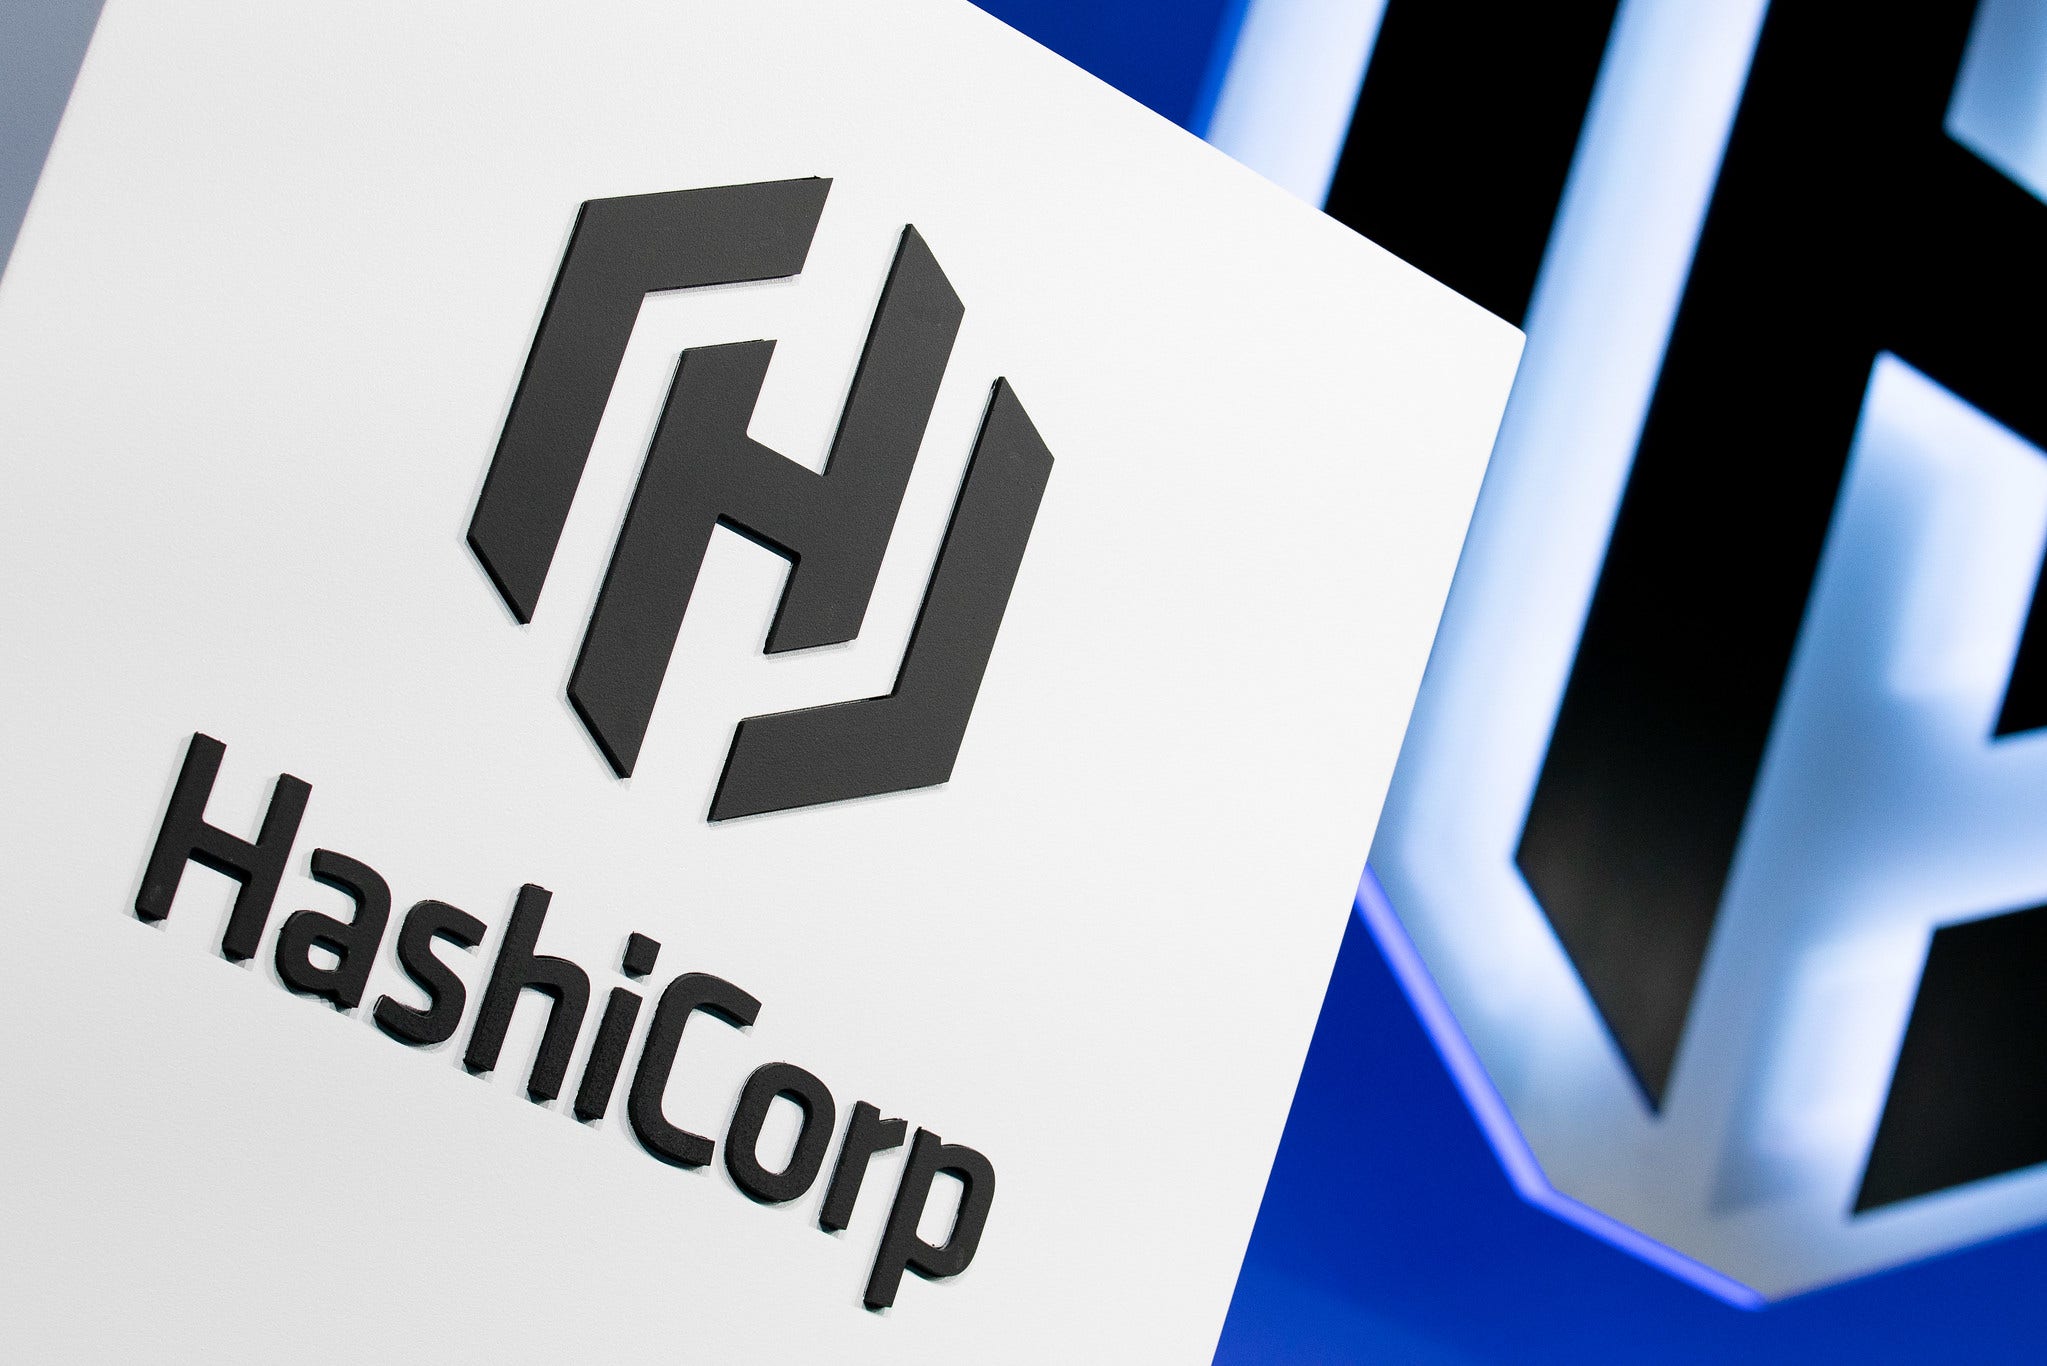 What Impressed This BofA Analyst To Initiate HashiCorp With A Buy Rating